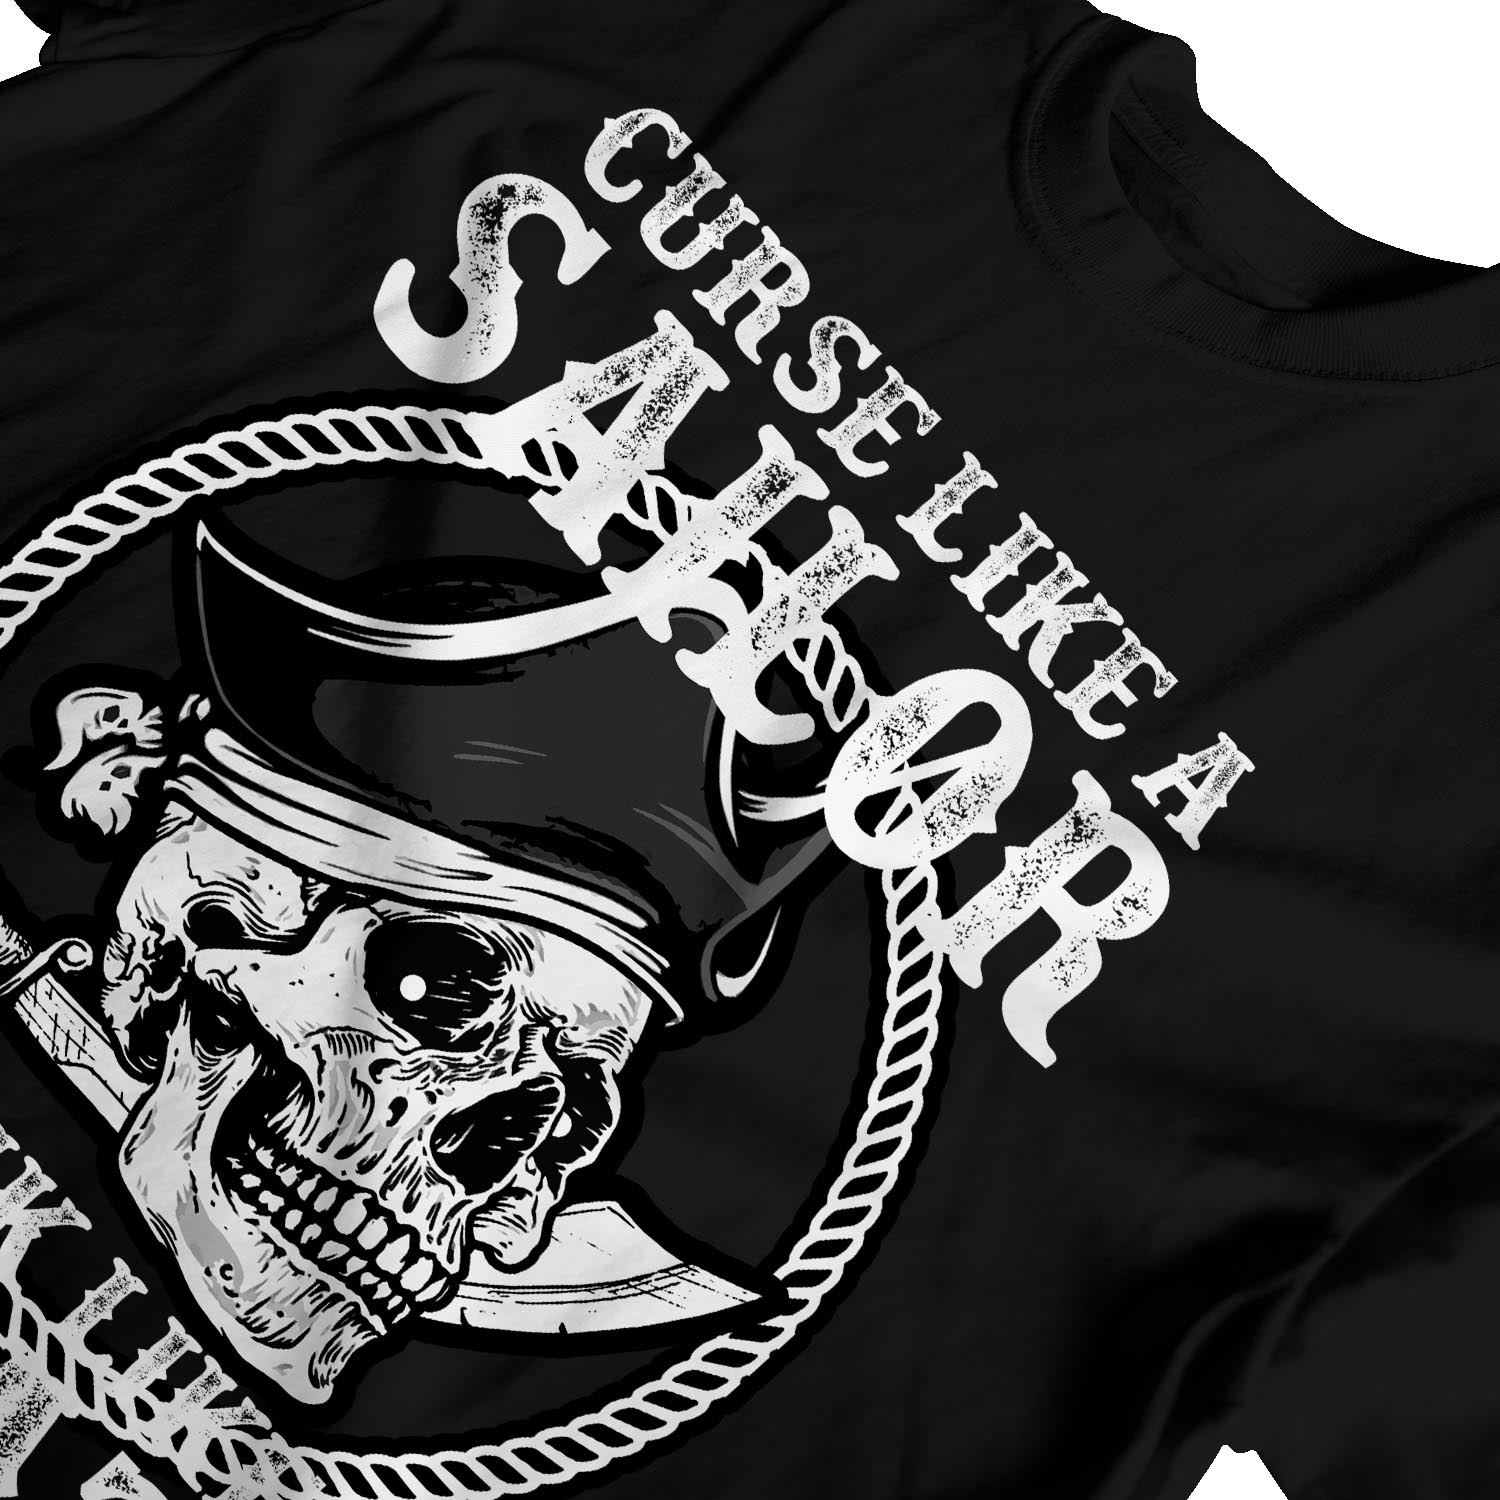 1Tee Womens Loose Fit Curse Like A Sailor, Drink Like A Pirate T-Shirt